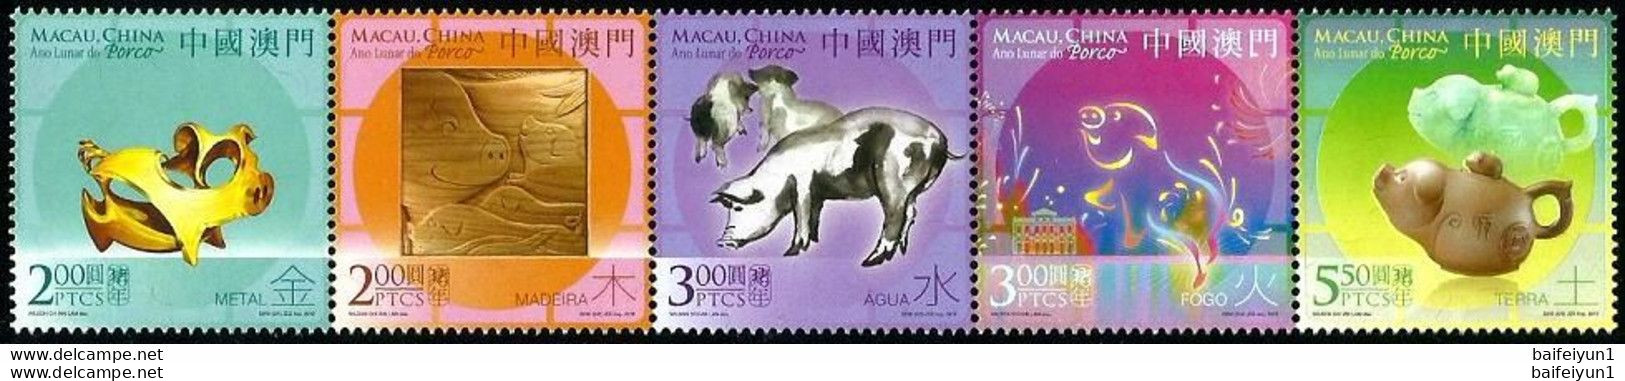 Macau 2019 China New Year Zodiac Of Pig Stamps 5v+ S/S Hologram - Holograms